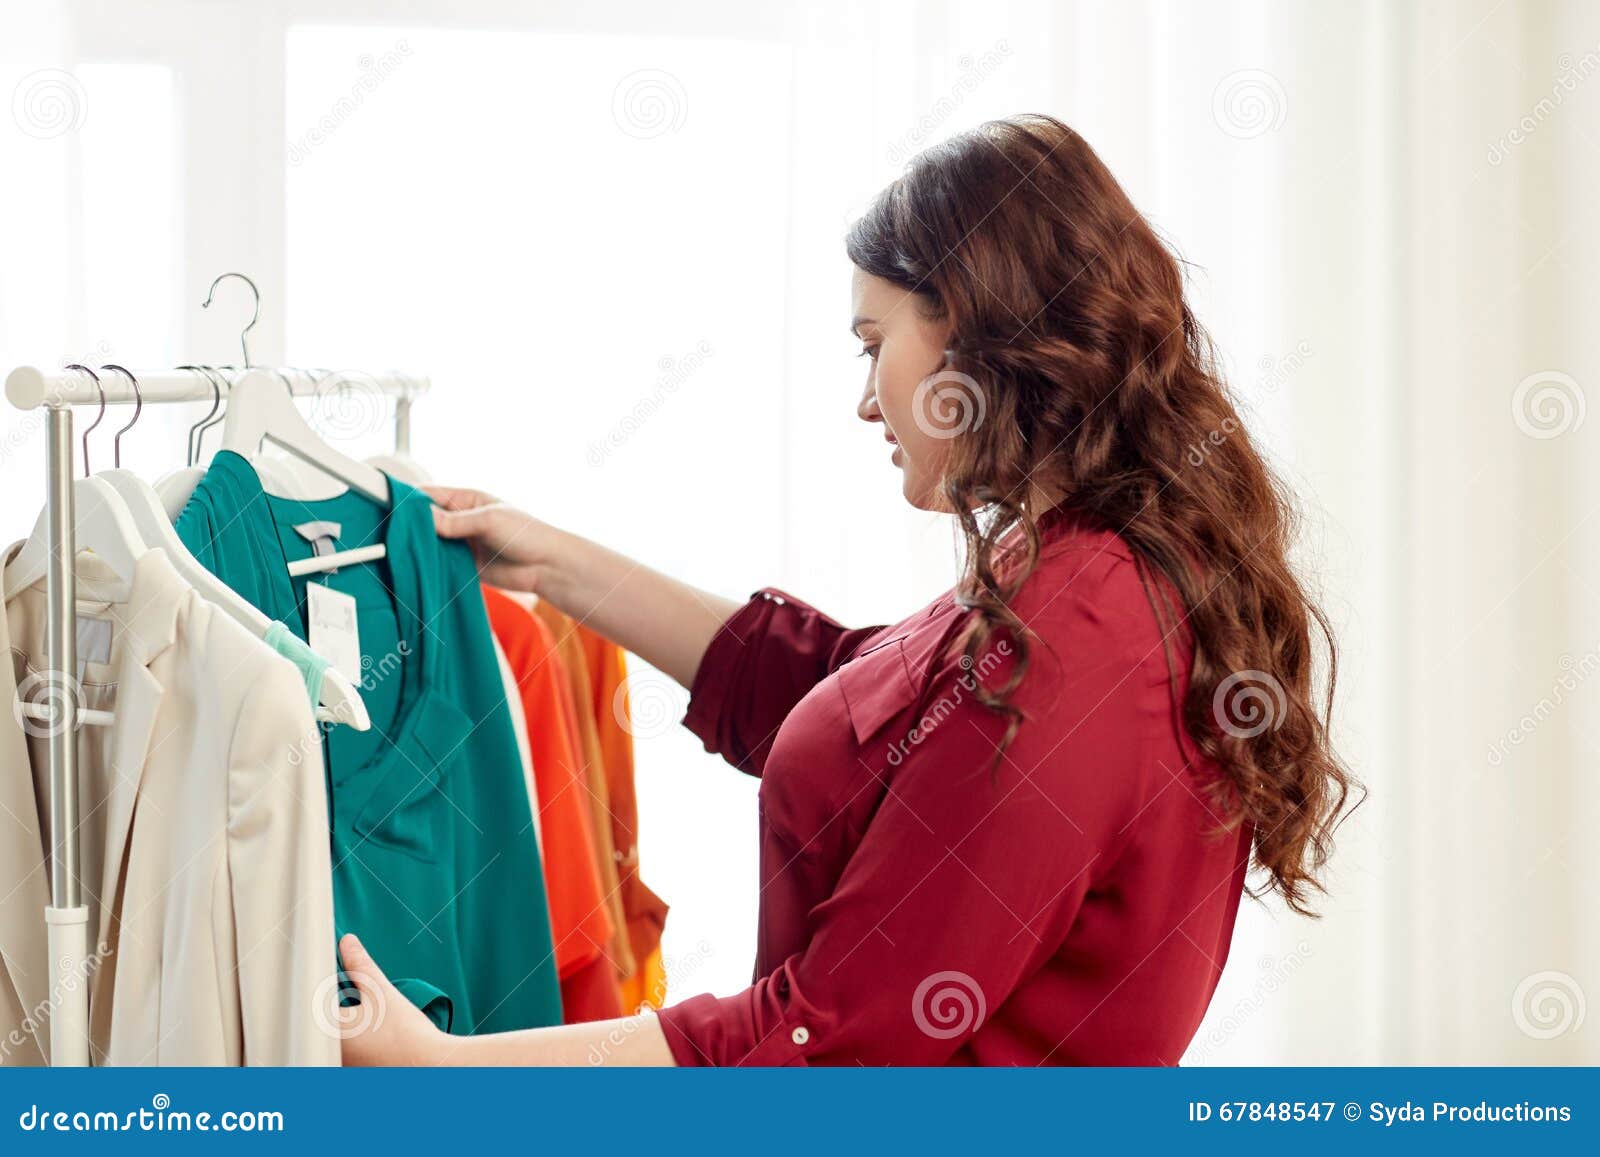 Happy Plus Size Woman Choosing Clothes at Wardrobe Stock Image - Image ...